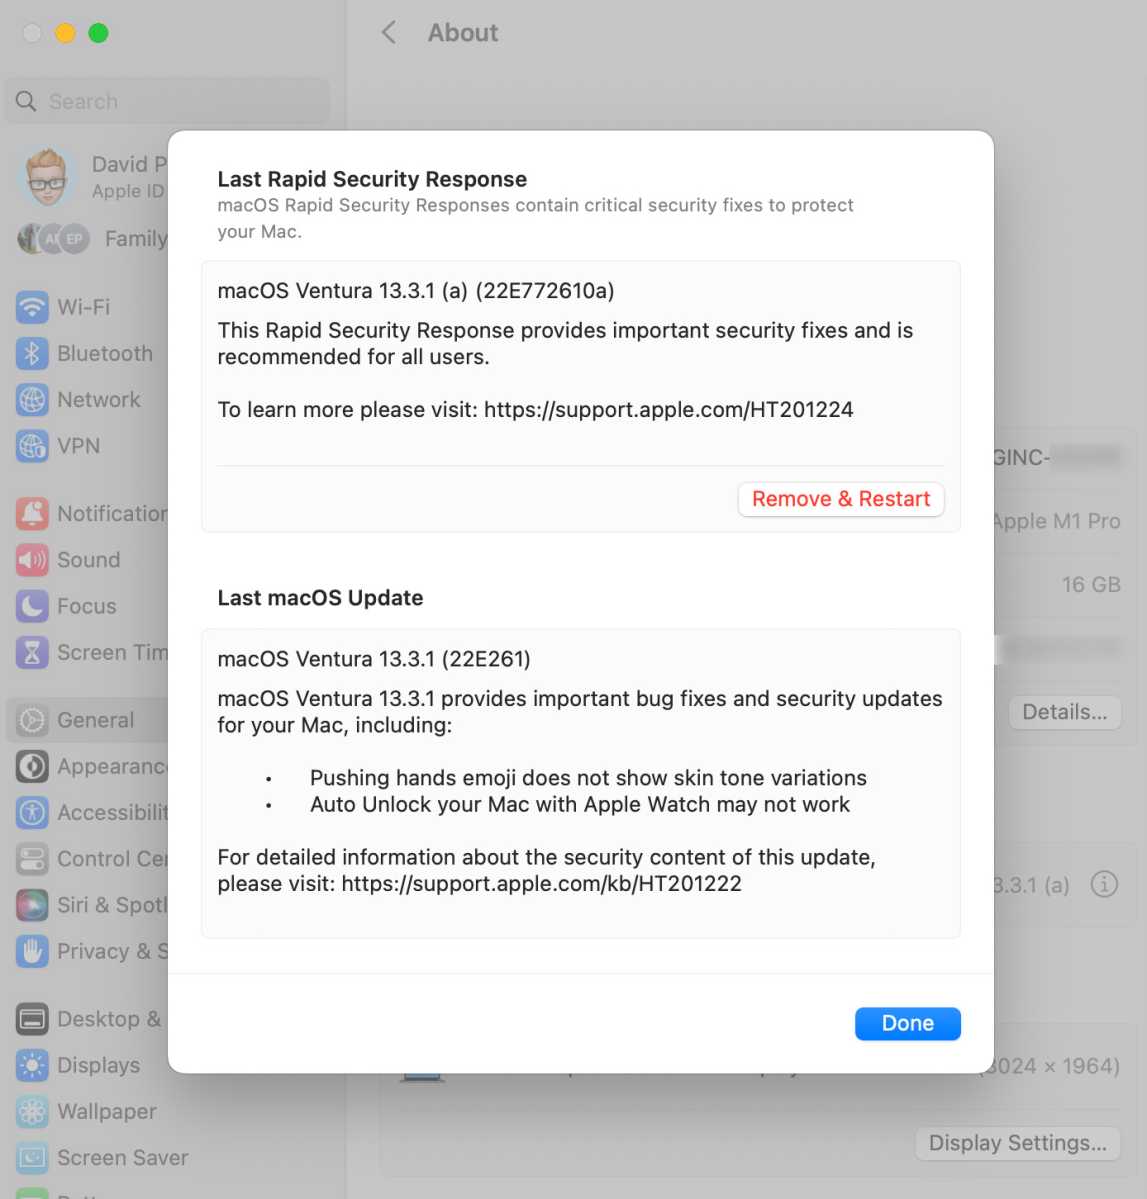 How to remove a Rapid Security Response on Mac